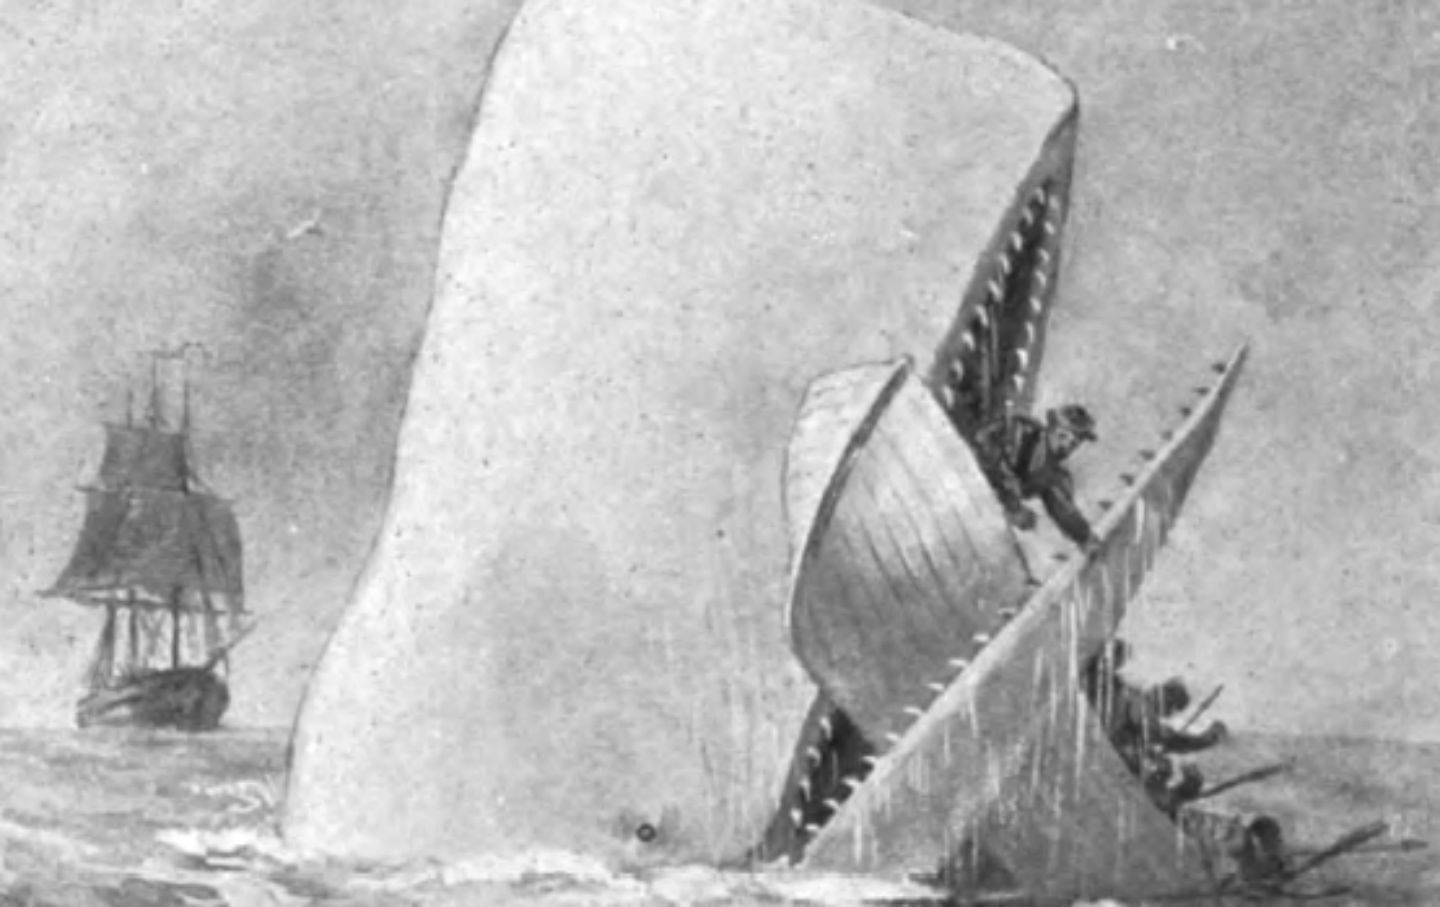 October 18, 1851: Herman Melville’s ‘Moby-Dick’ Is Published